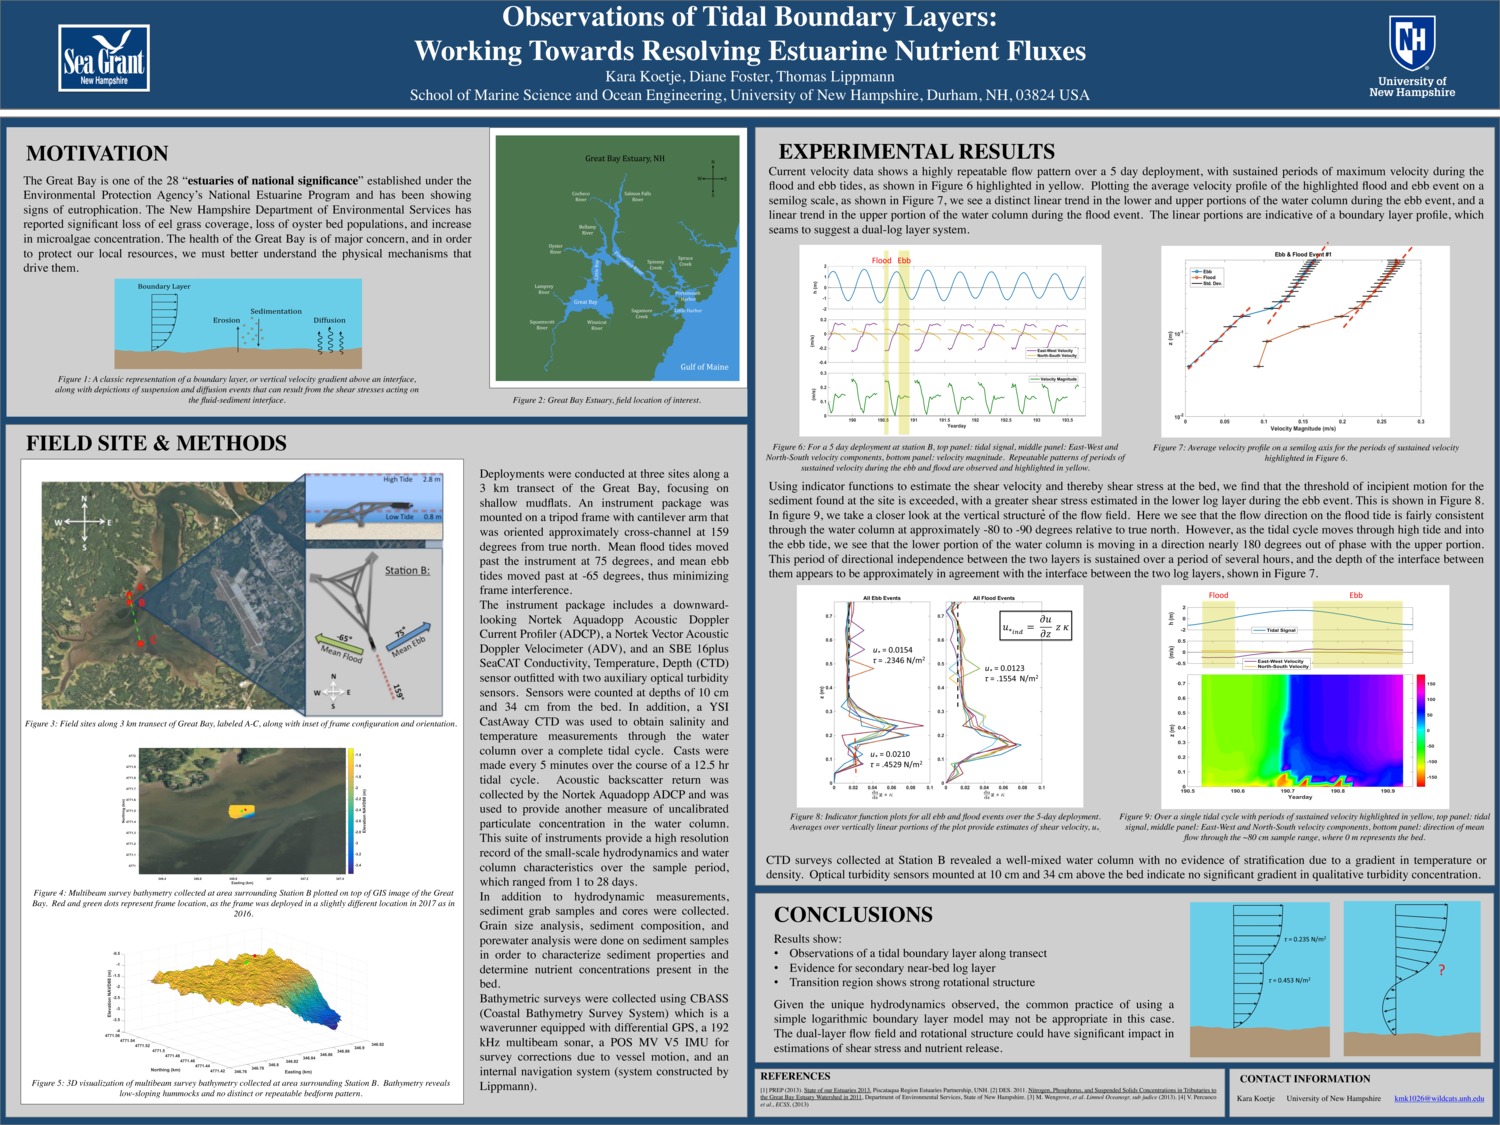 Observations Of Tidal Boundary Layers: Working Towards Resolving Estuarine Nutrient Fluxes by kmk1026